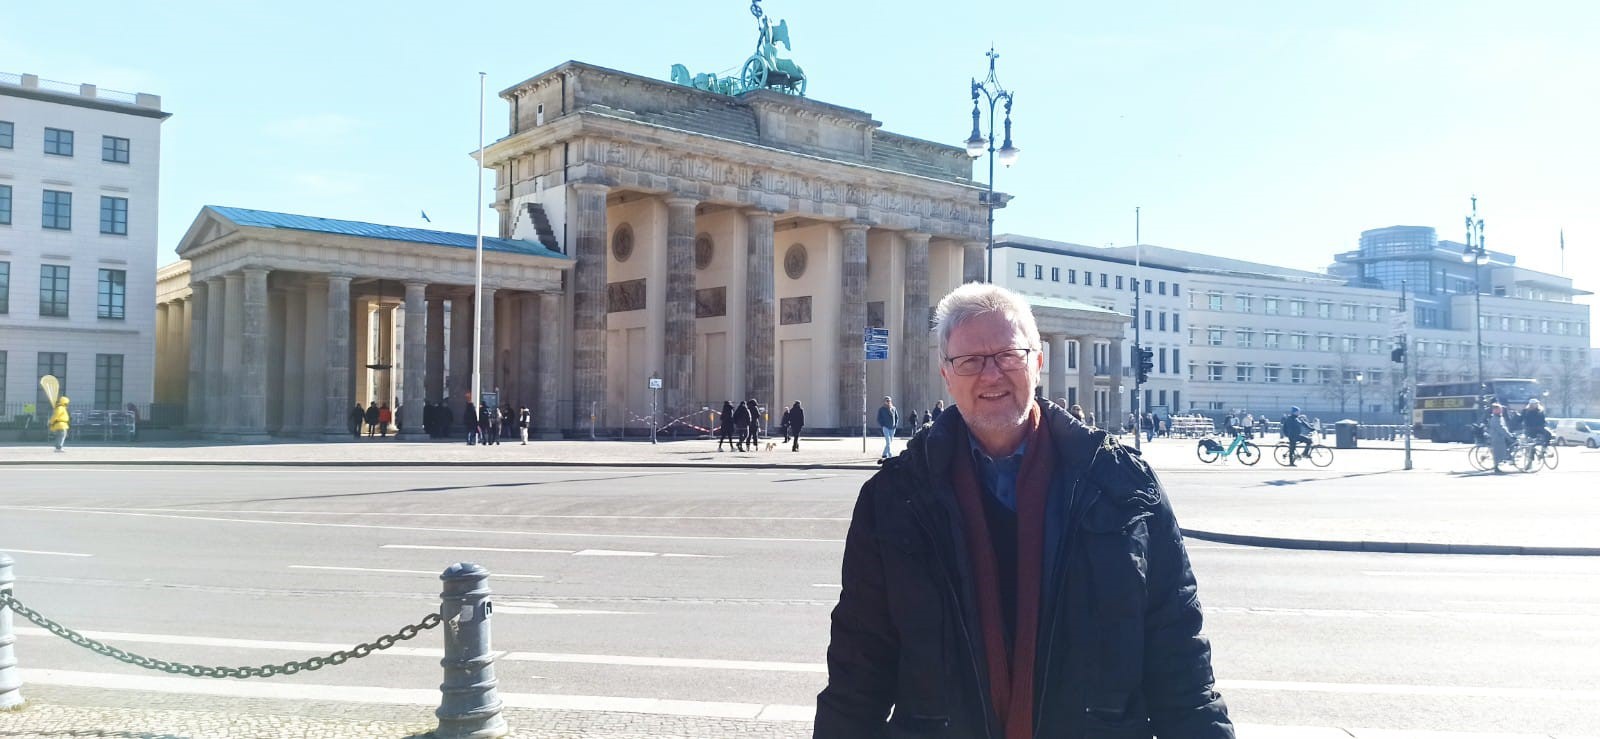 DHV and CIICA at the Bundestag, Germany